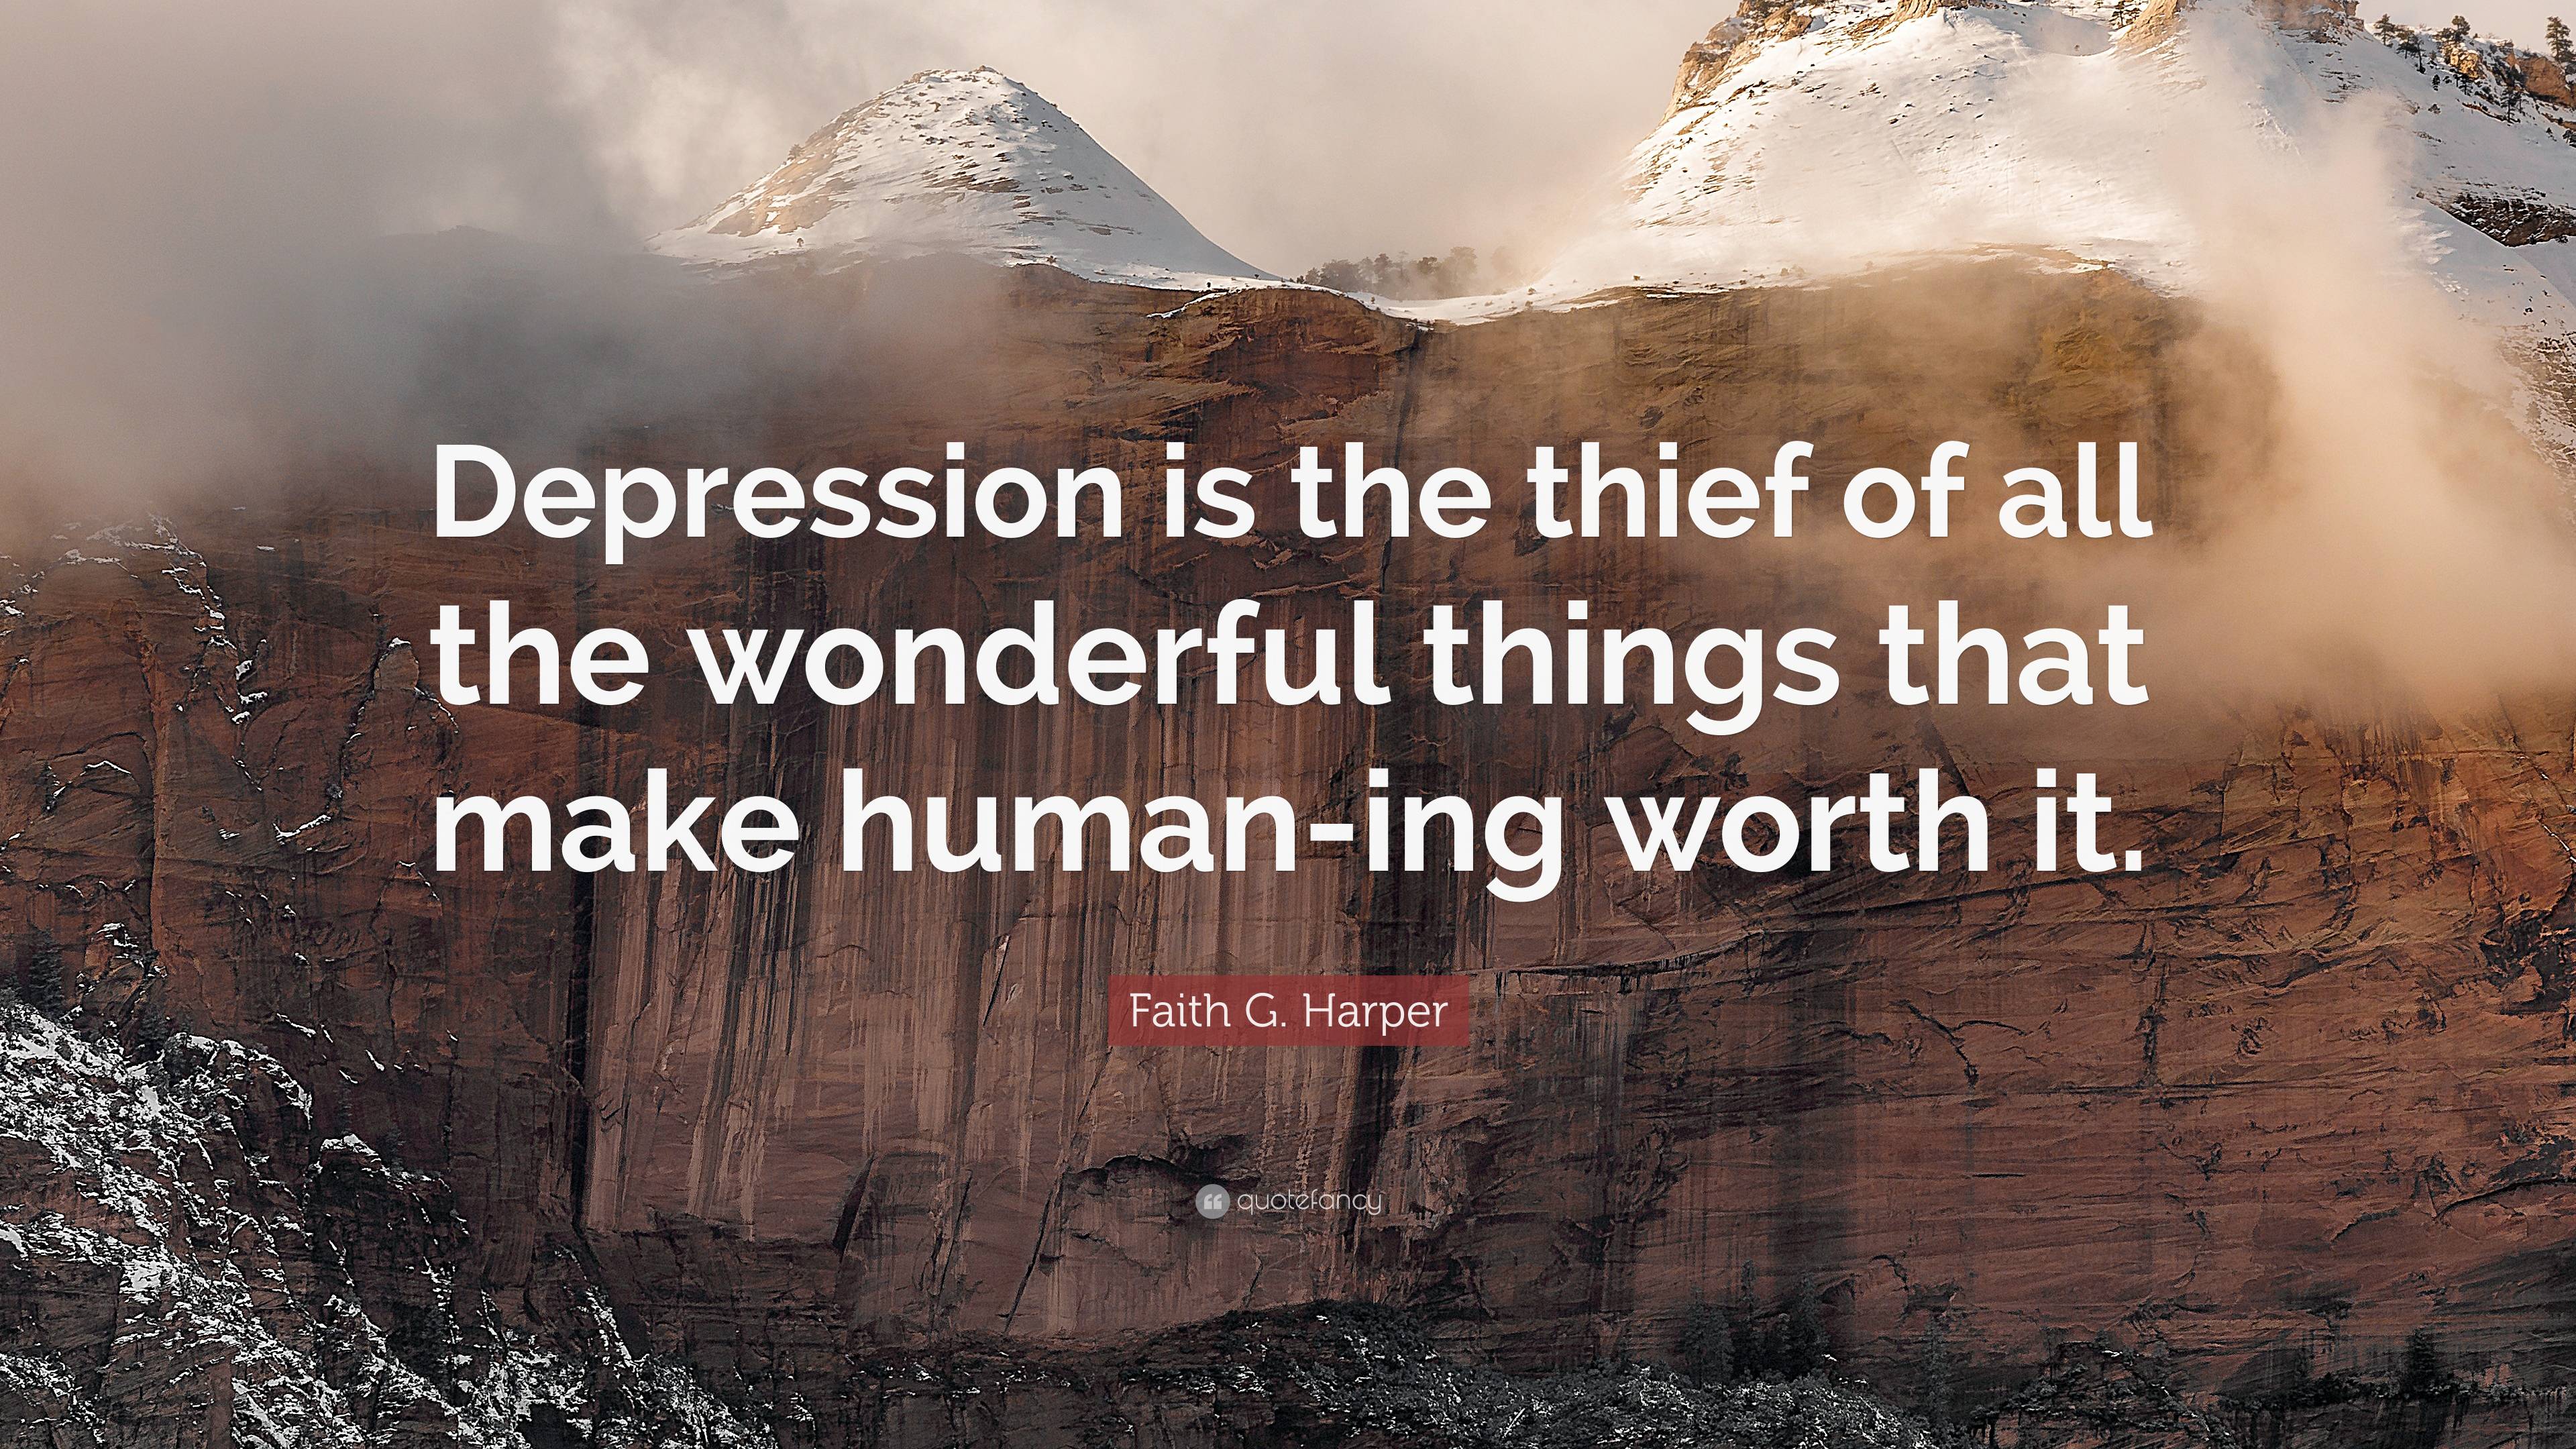 Faith G. Harper Quote: “Depression is the thief of all the wonderful ...